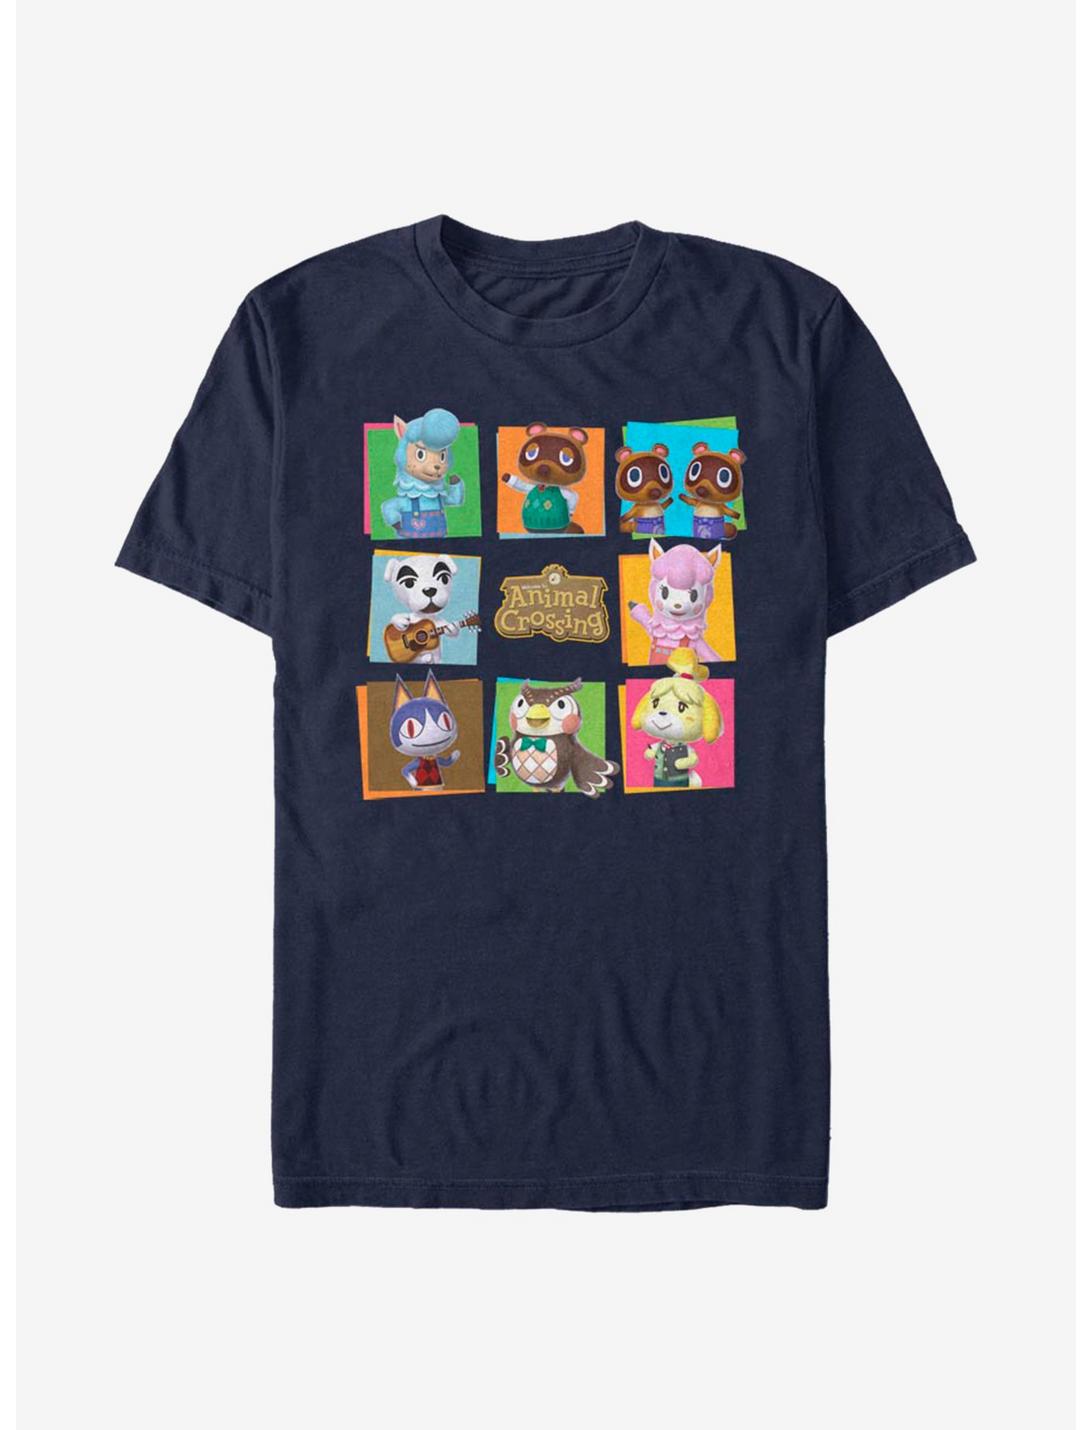 Extra Soft Nintendo Animal Crossing 8 Character Paste Up T-Shirt, NAVY, hi-res